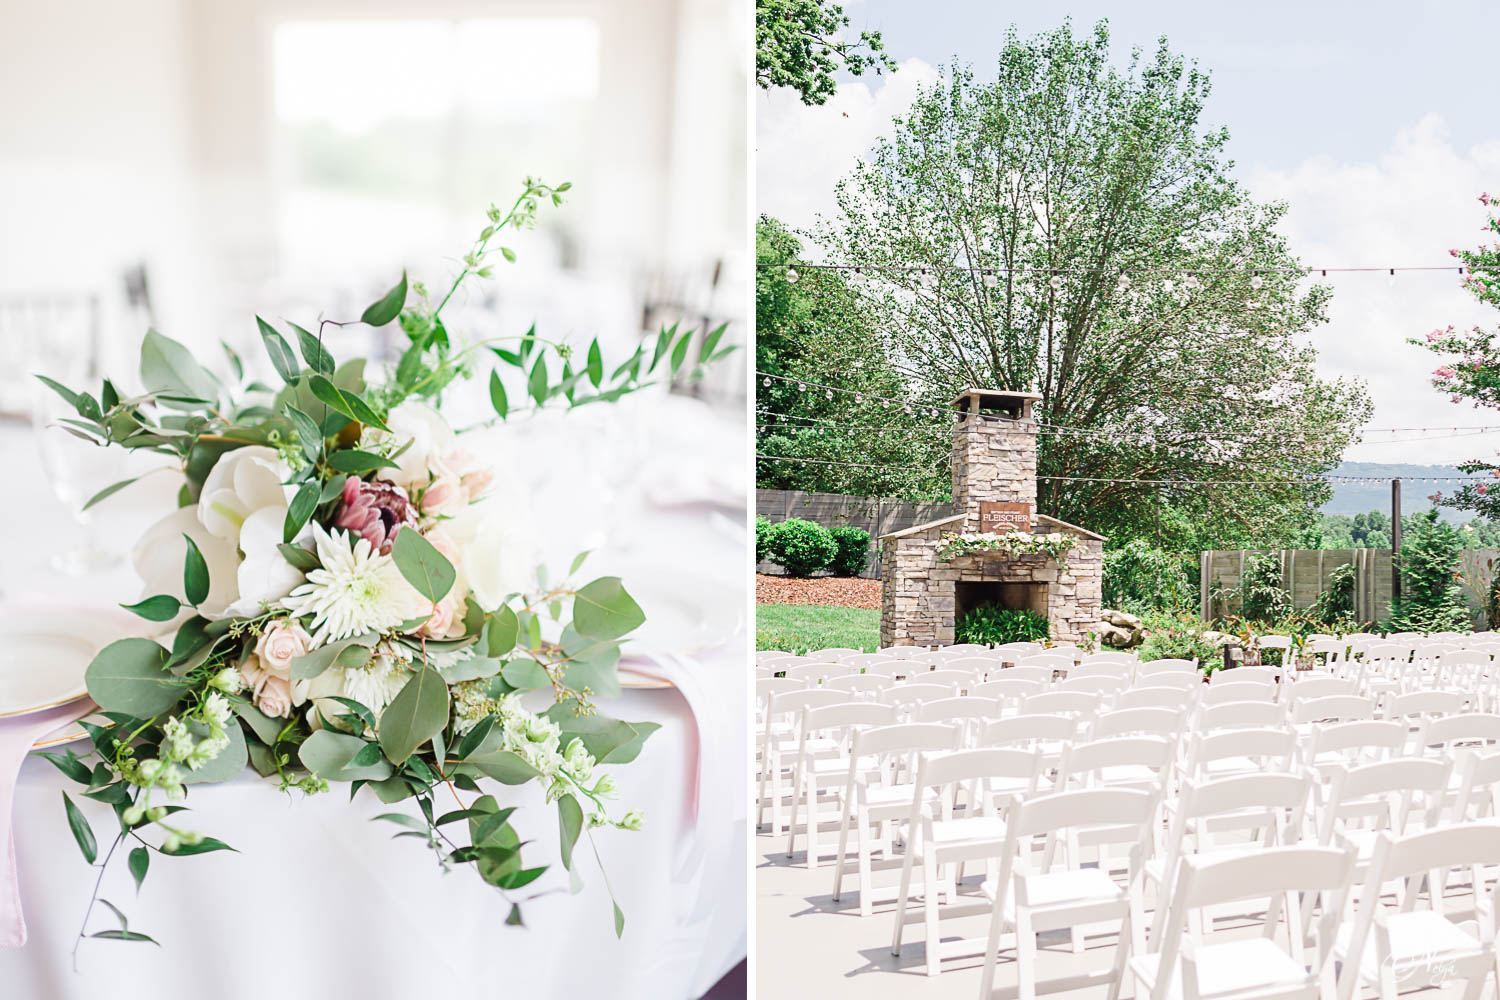 florals by Lilly Lou of Hixon on a white background and the outdoor fireplace with white wedding ceremony chairs at the garden in Chattanooga TN